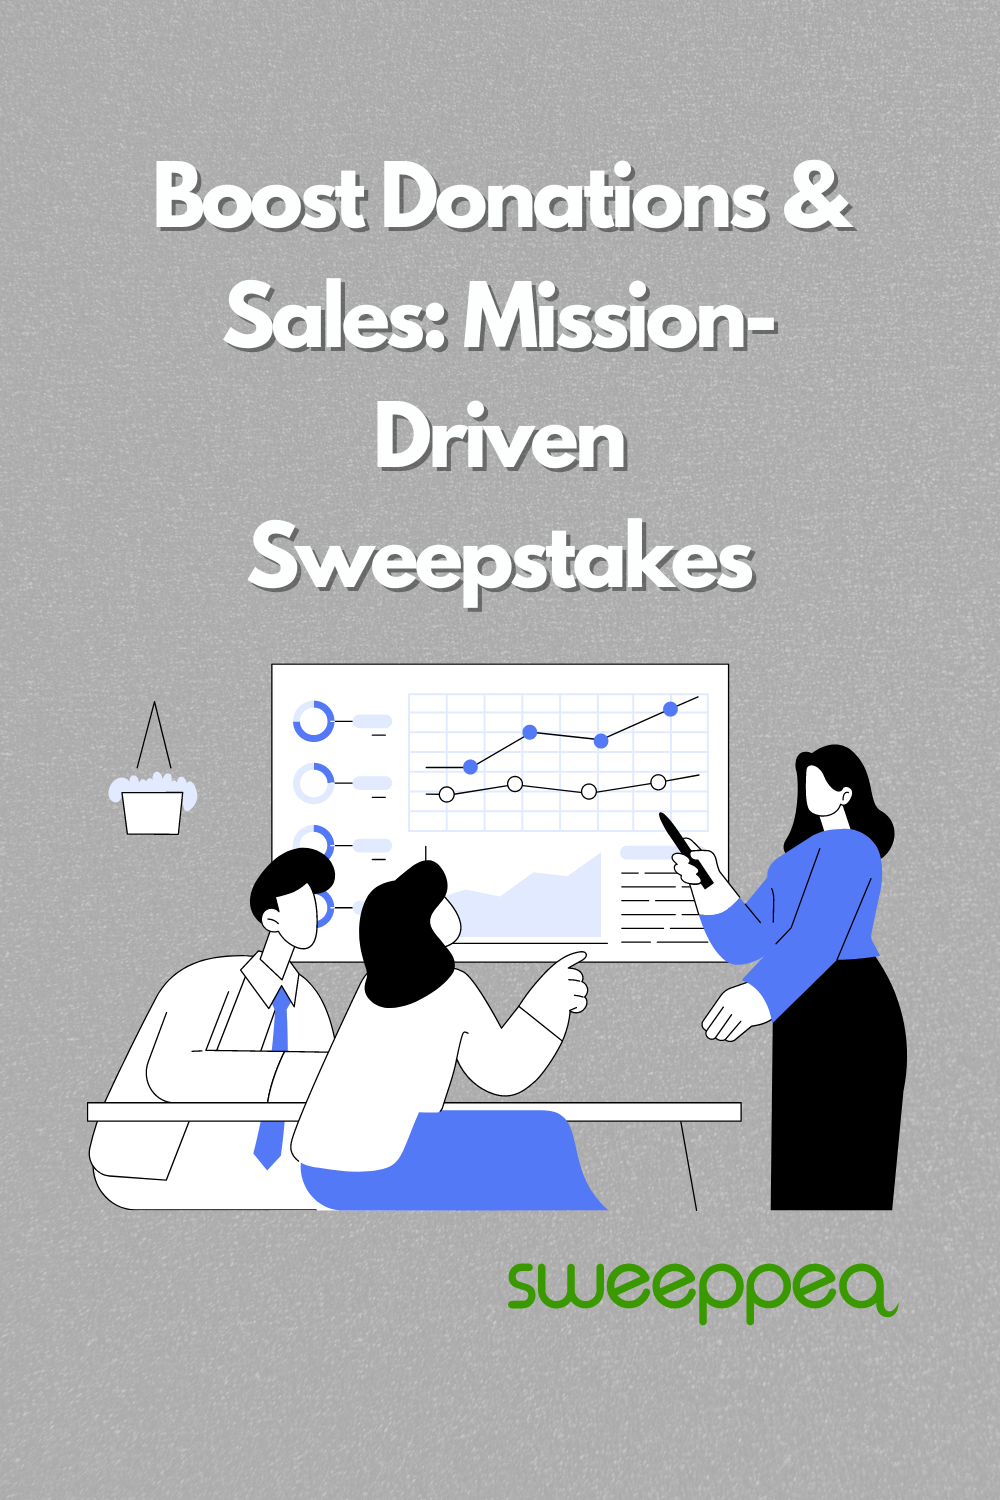 Boost Donations & Sales Mission-Driven Sweepstakes